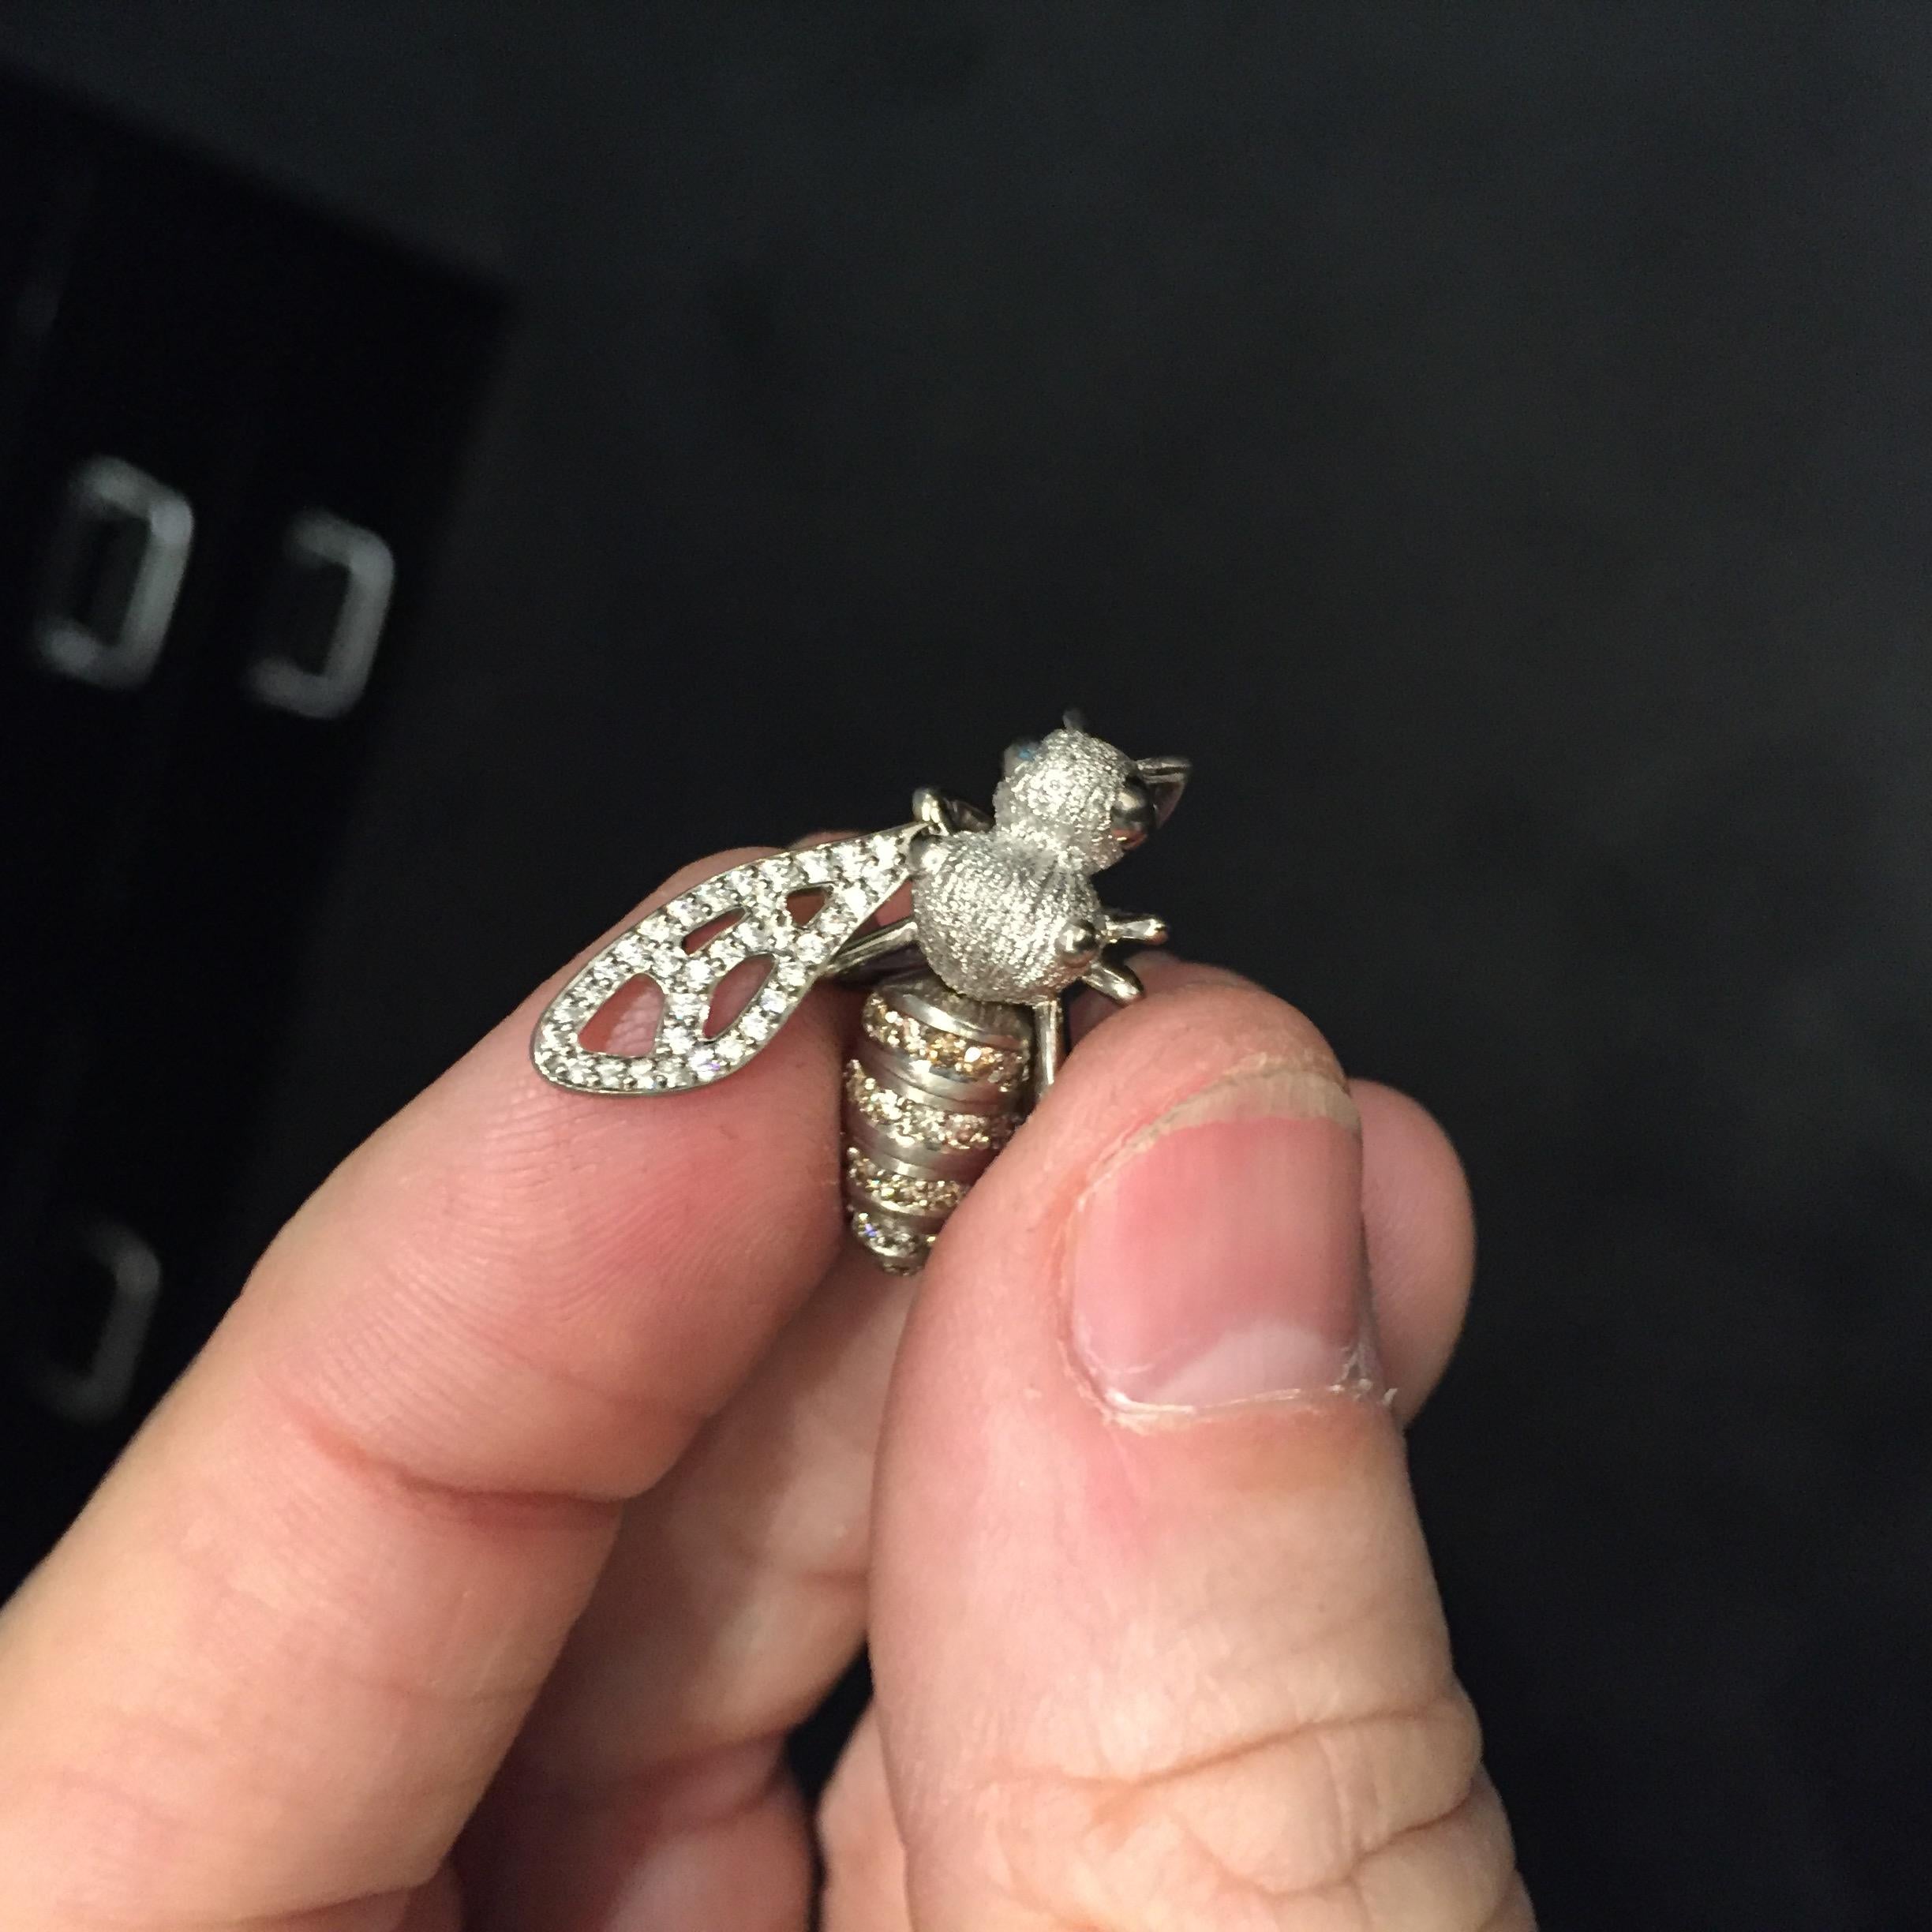 Brilliant Cut Sculptural Bee Pendant, 18k White and Yellow Gold, 97 Diamonds, Insect For Sale